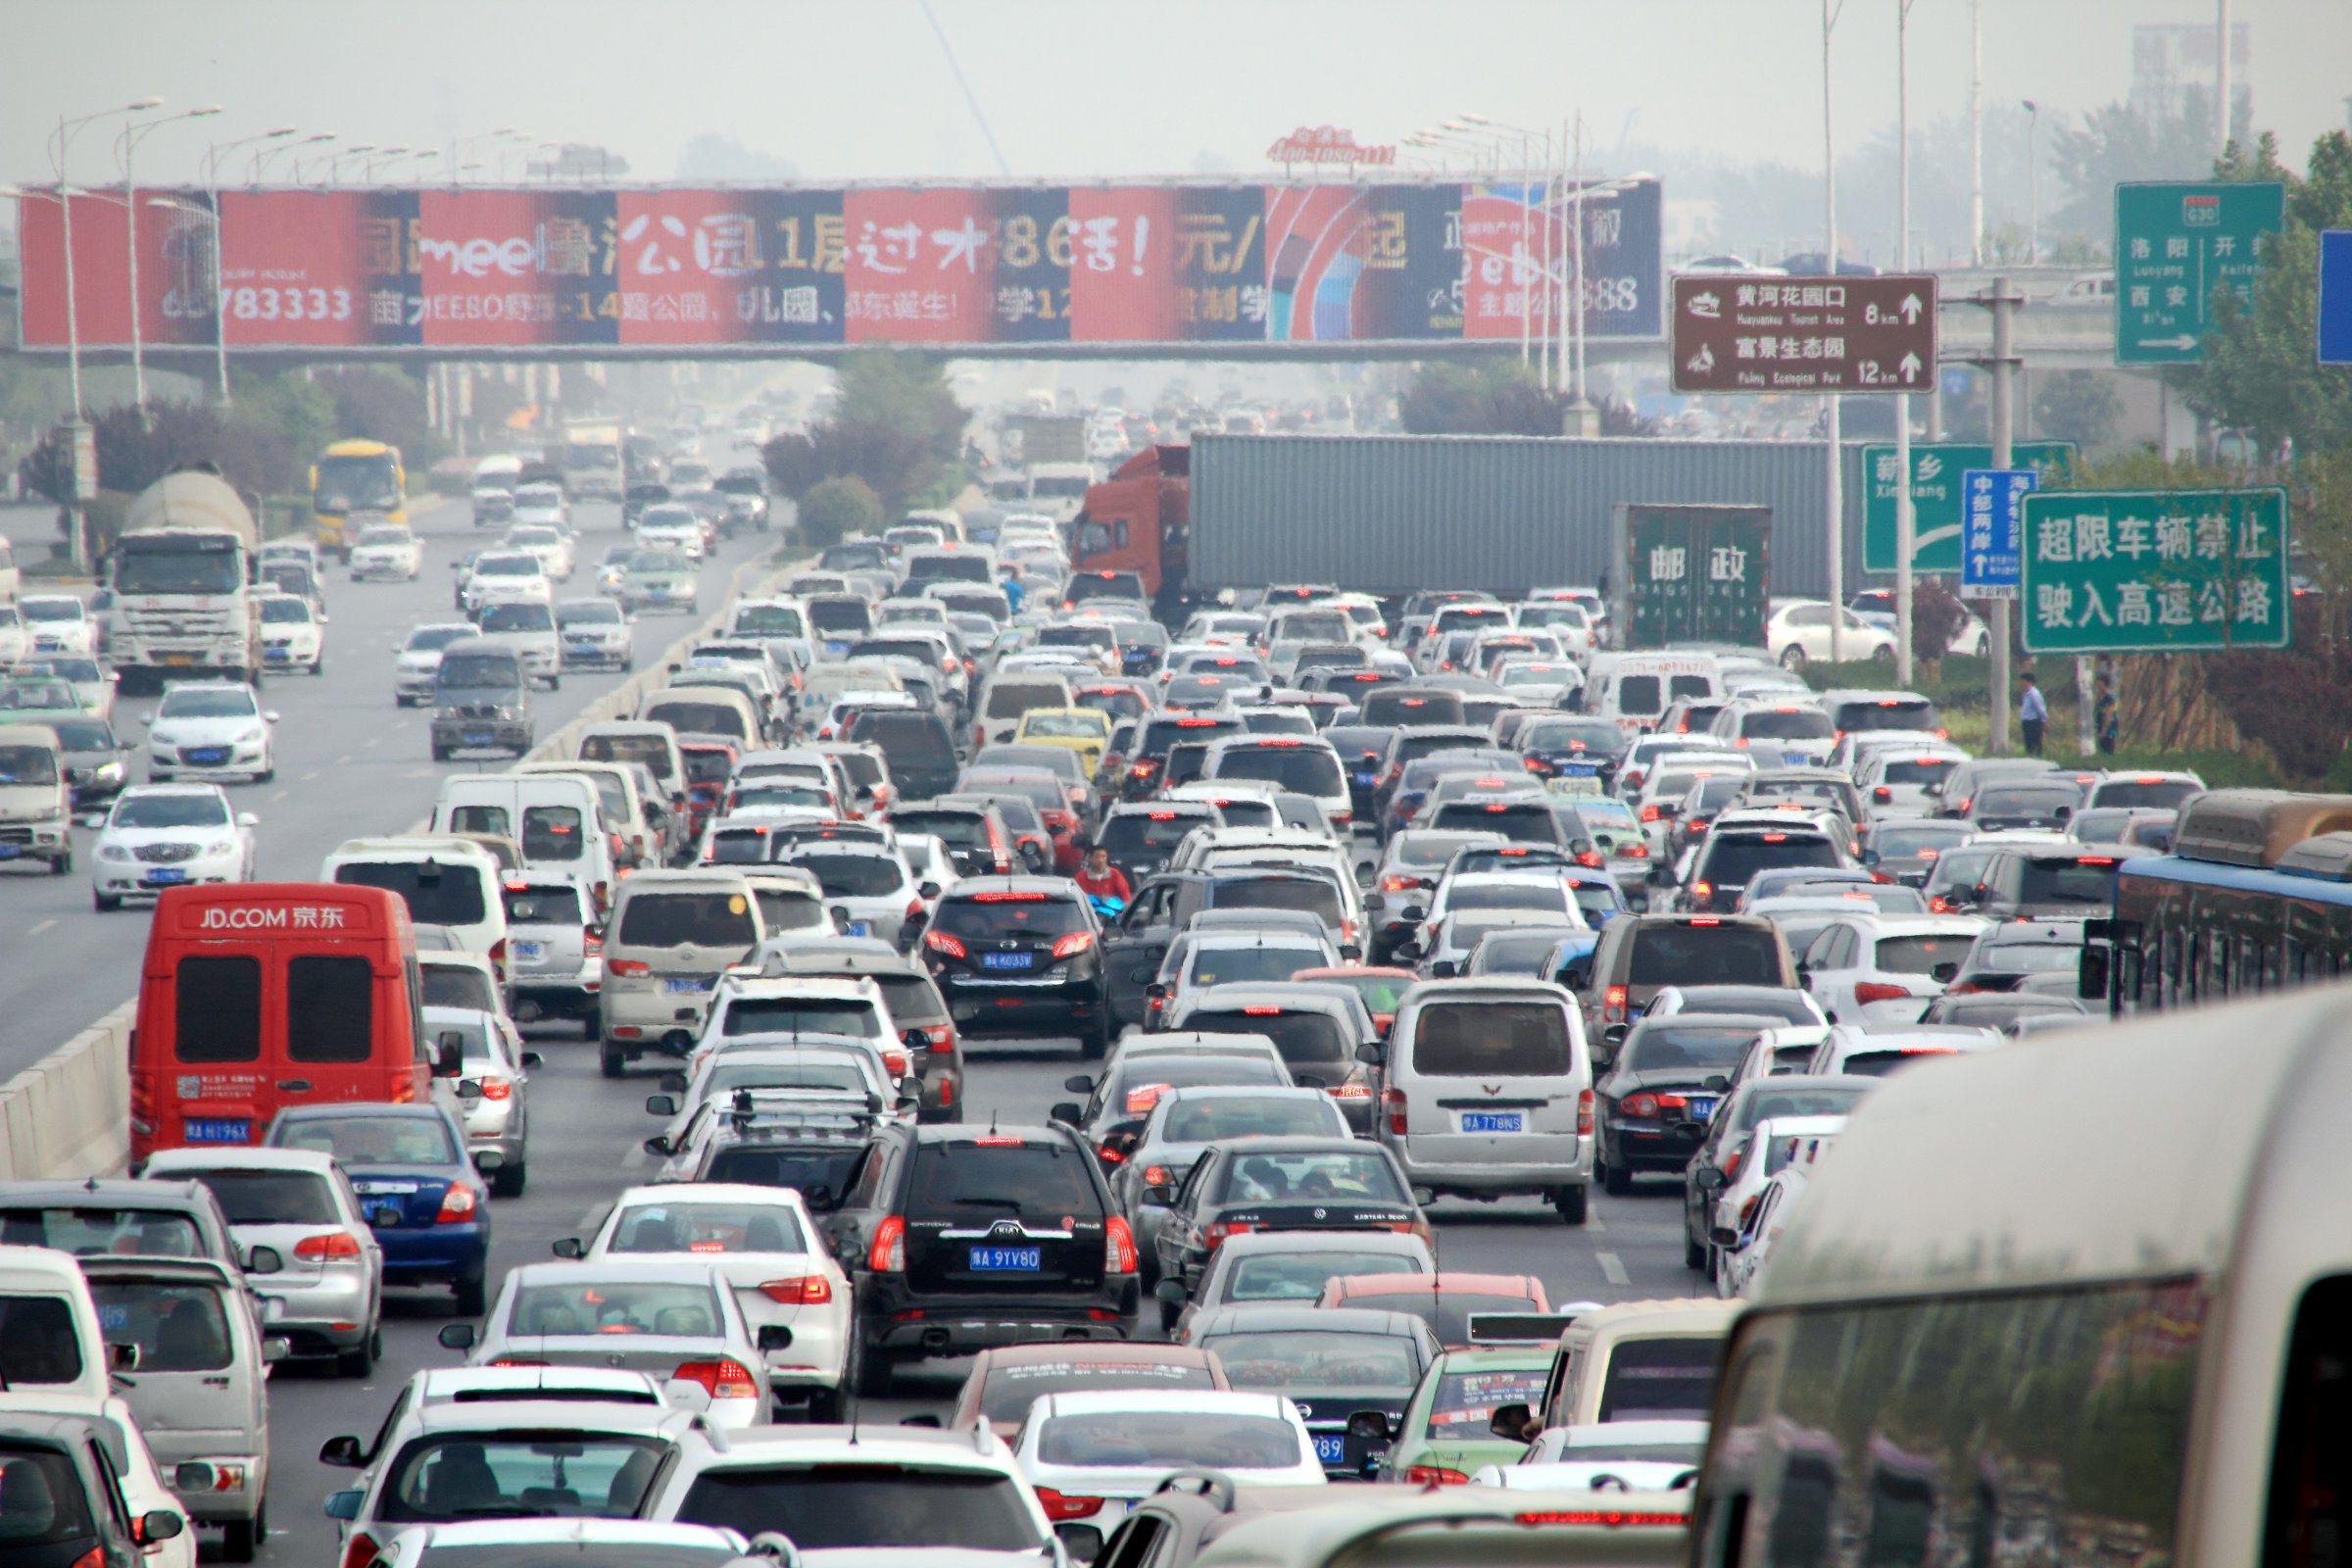 Holiday travel rush congests roads in Chinese cities